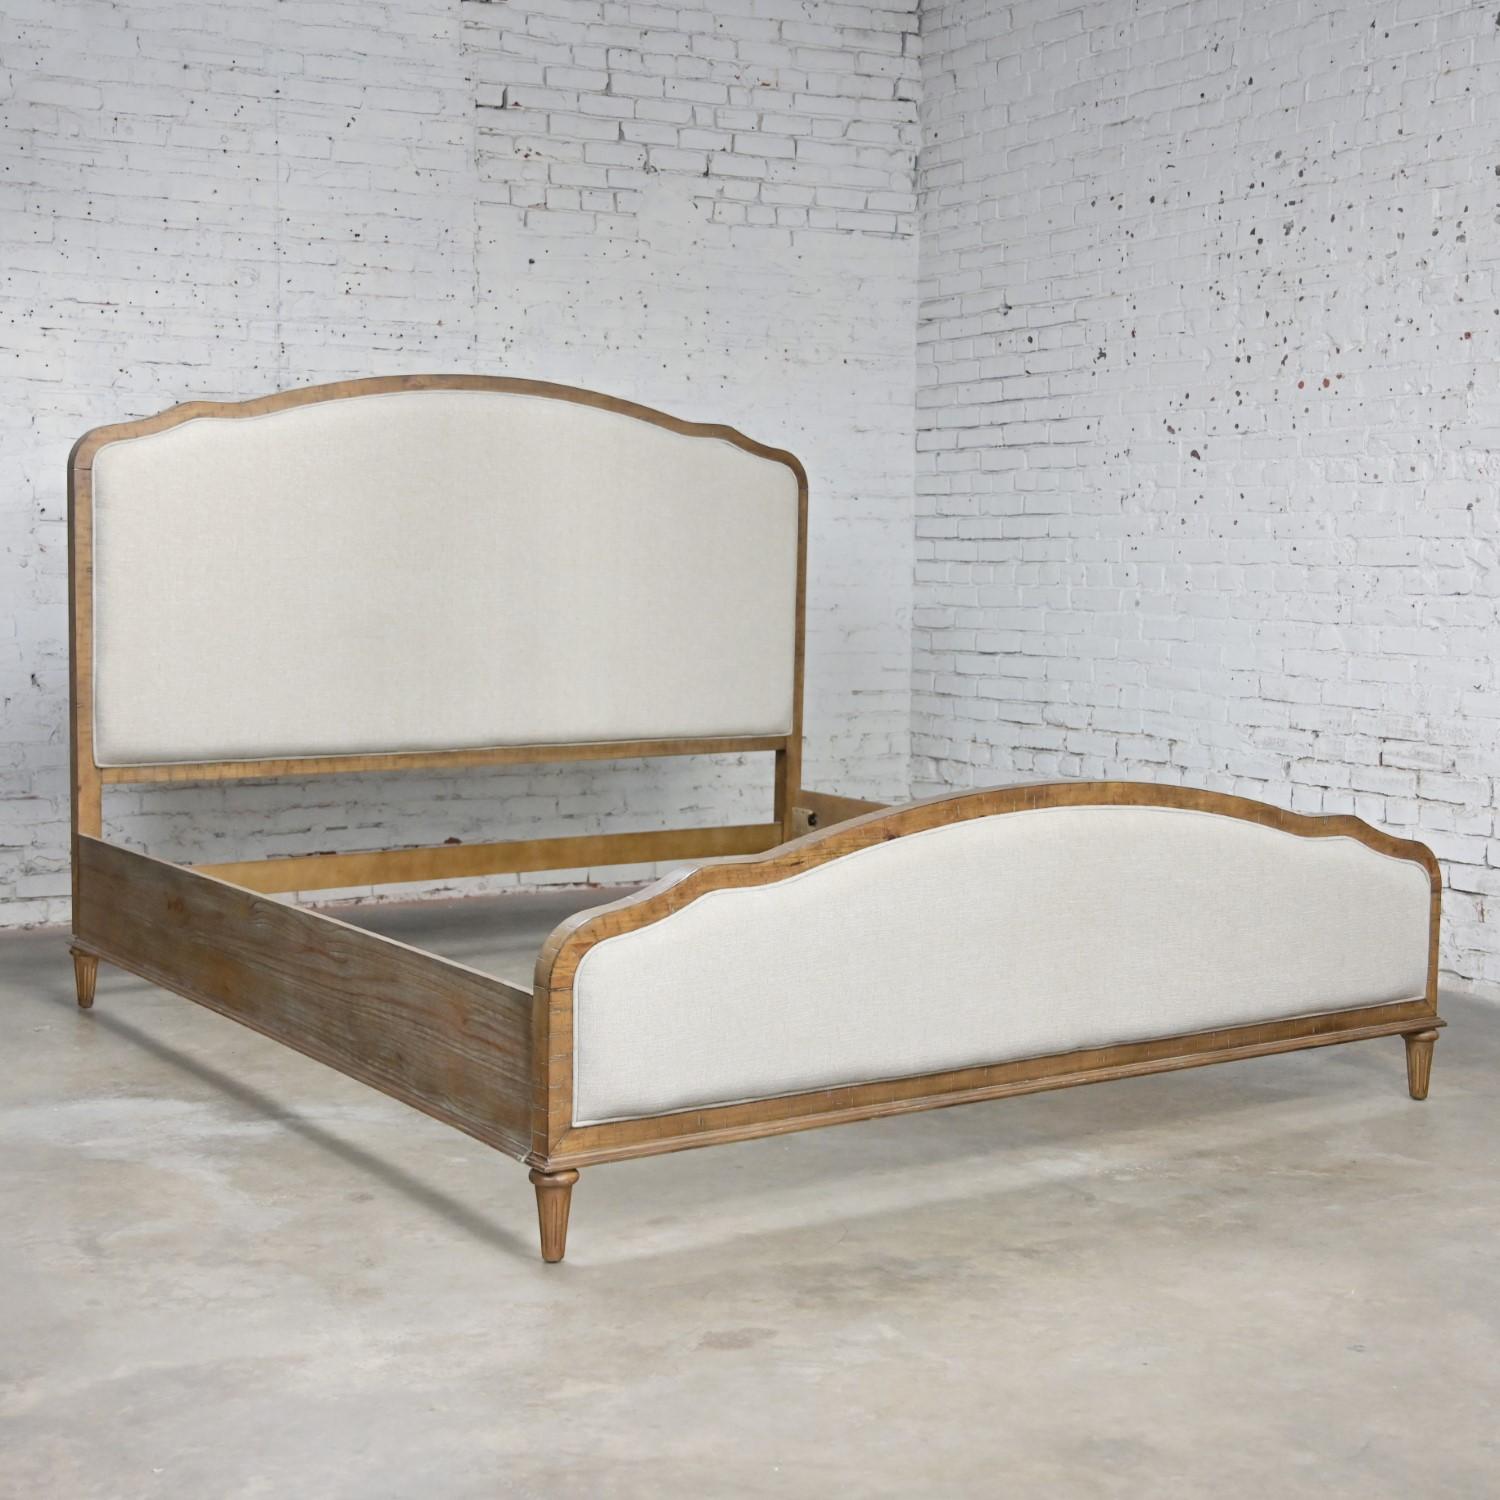 Fabric Early 21st Century French Country Rustic Mahogany & Upholstered King Size Bed For Sale